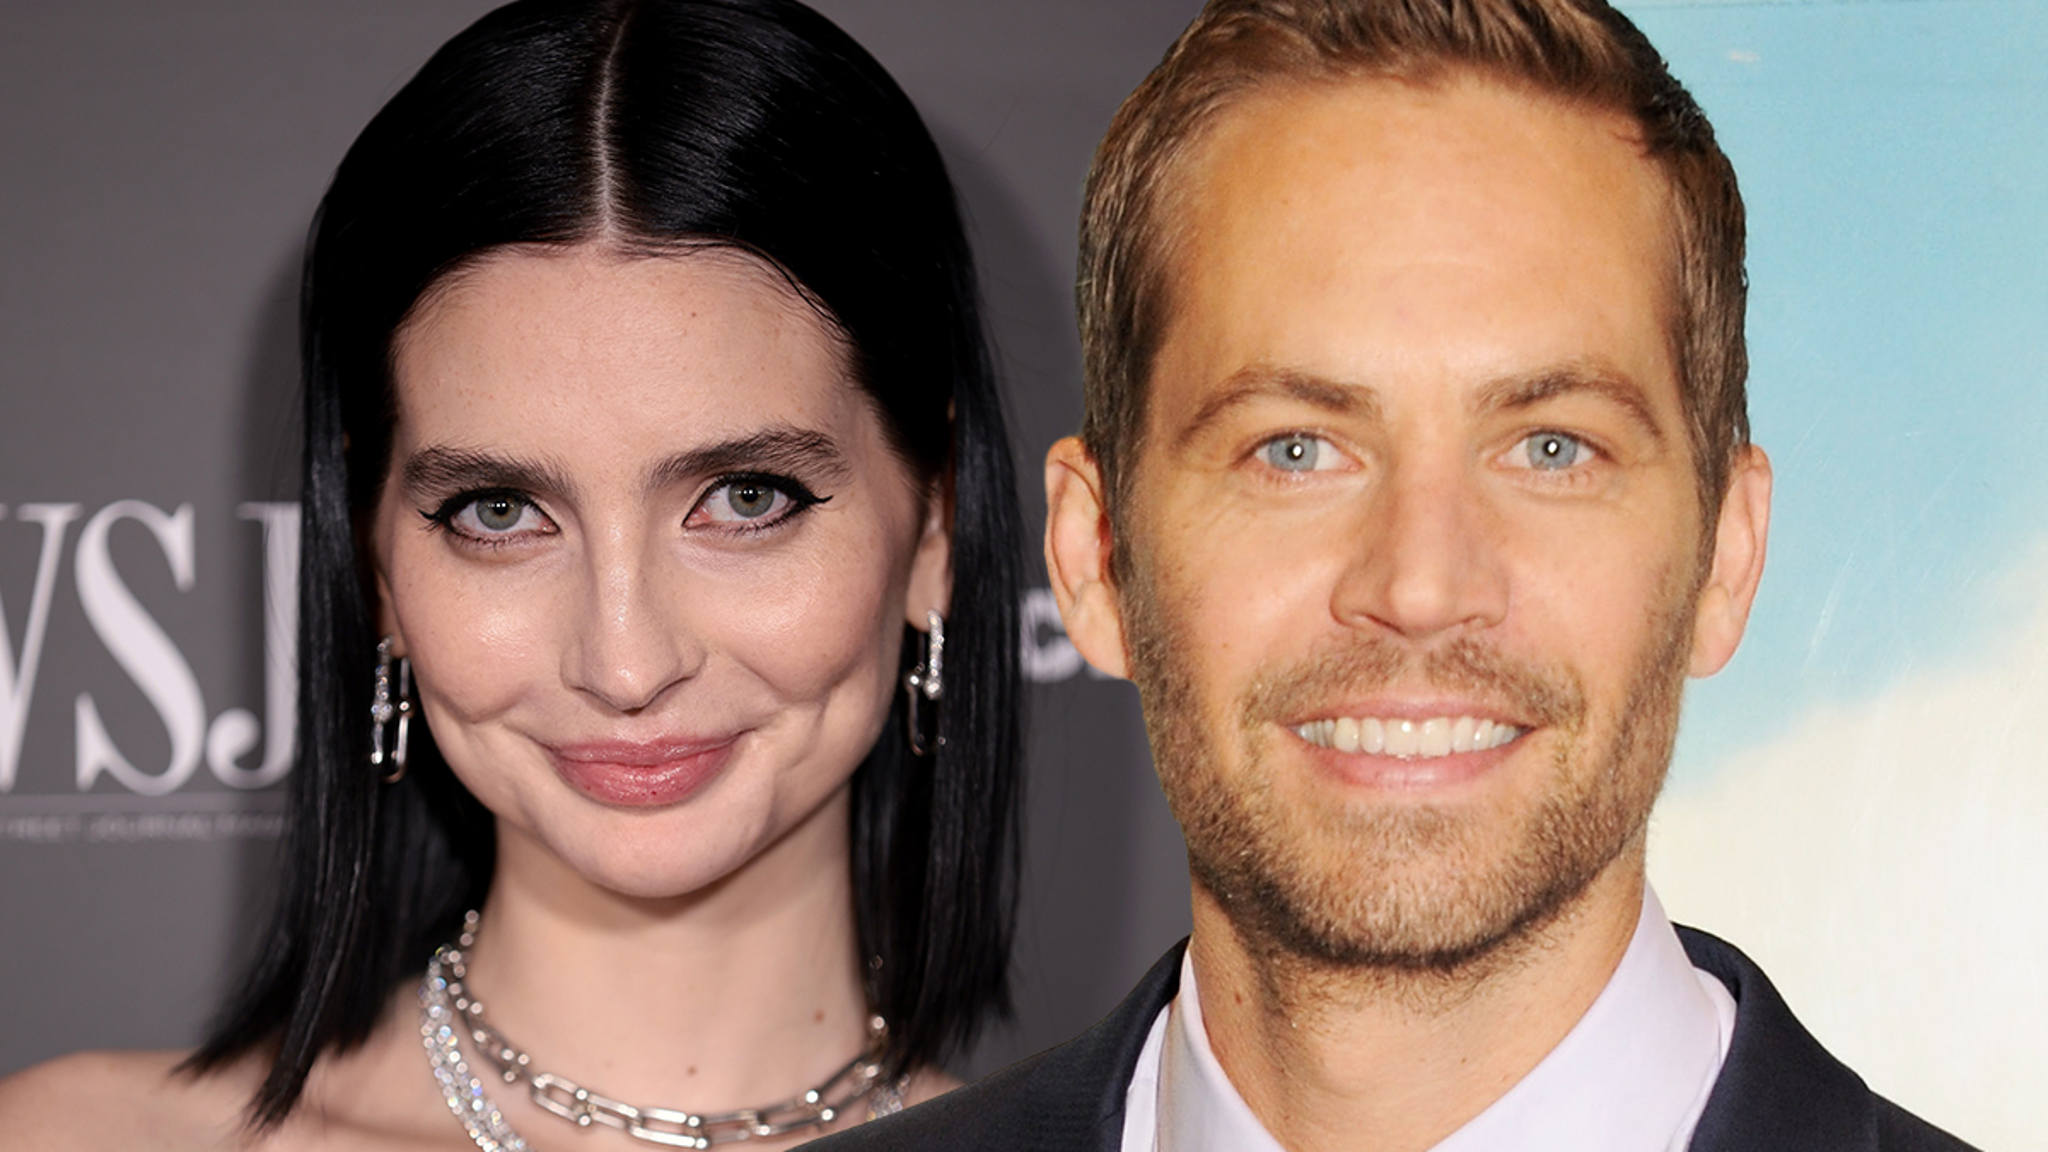 Paul Walker’s daughter Meadow Walker is making a cameo in the new ‘Fast X’ movie